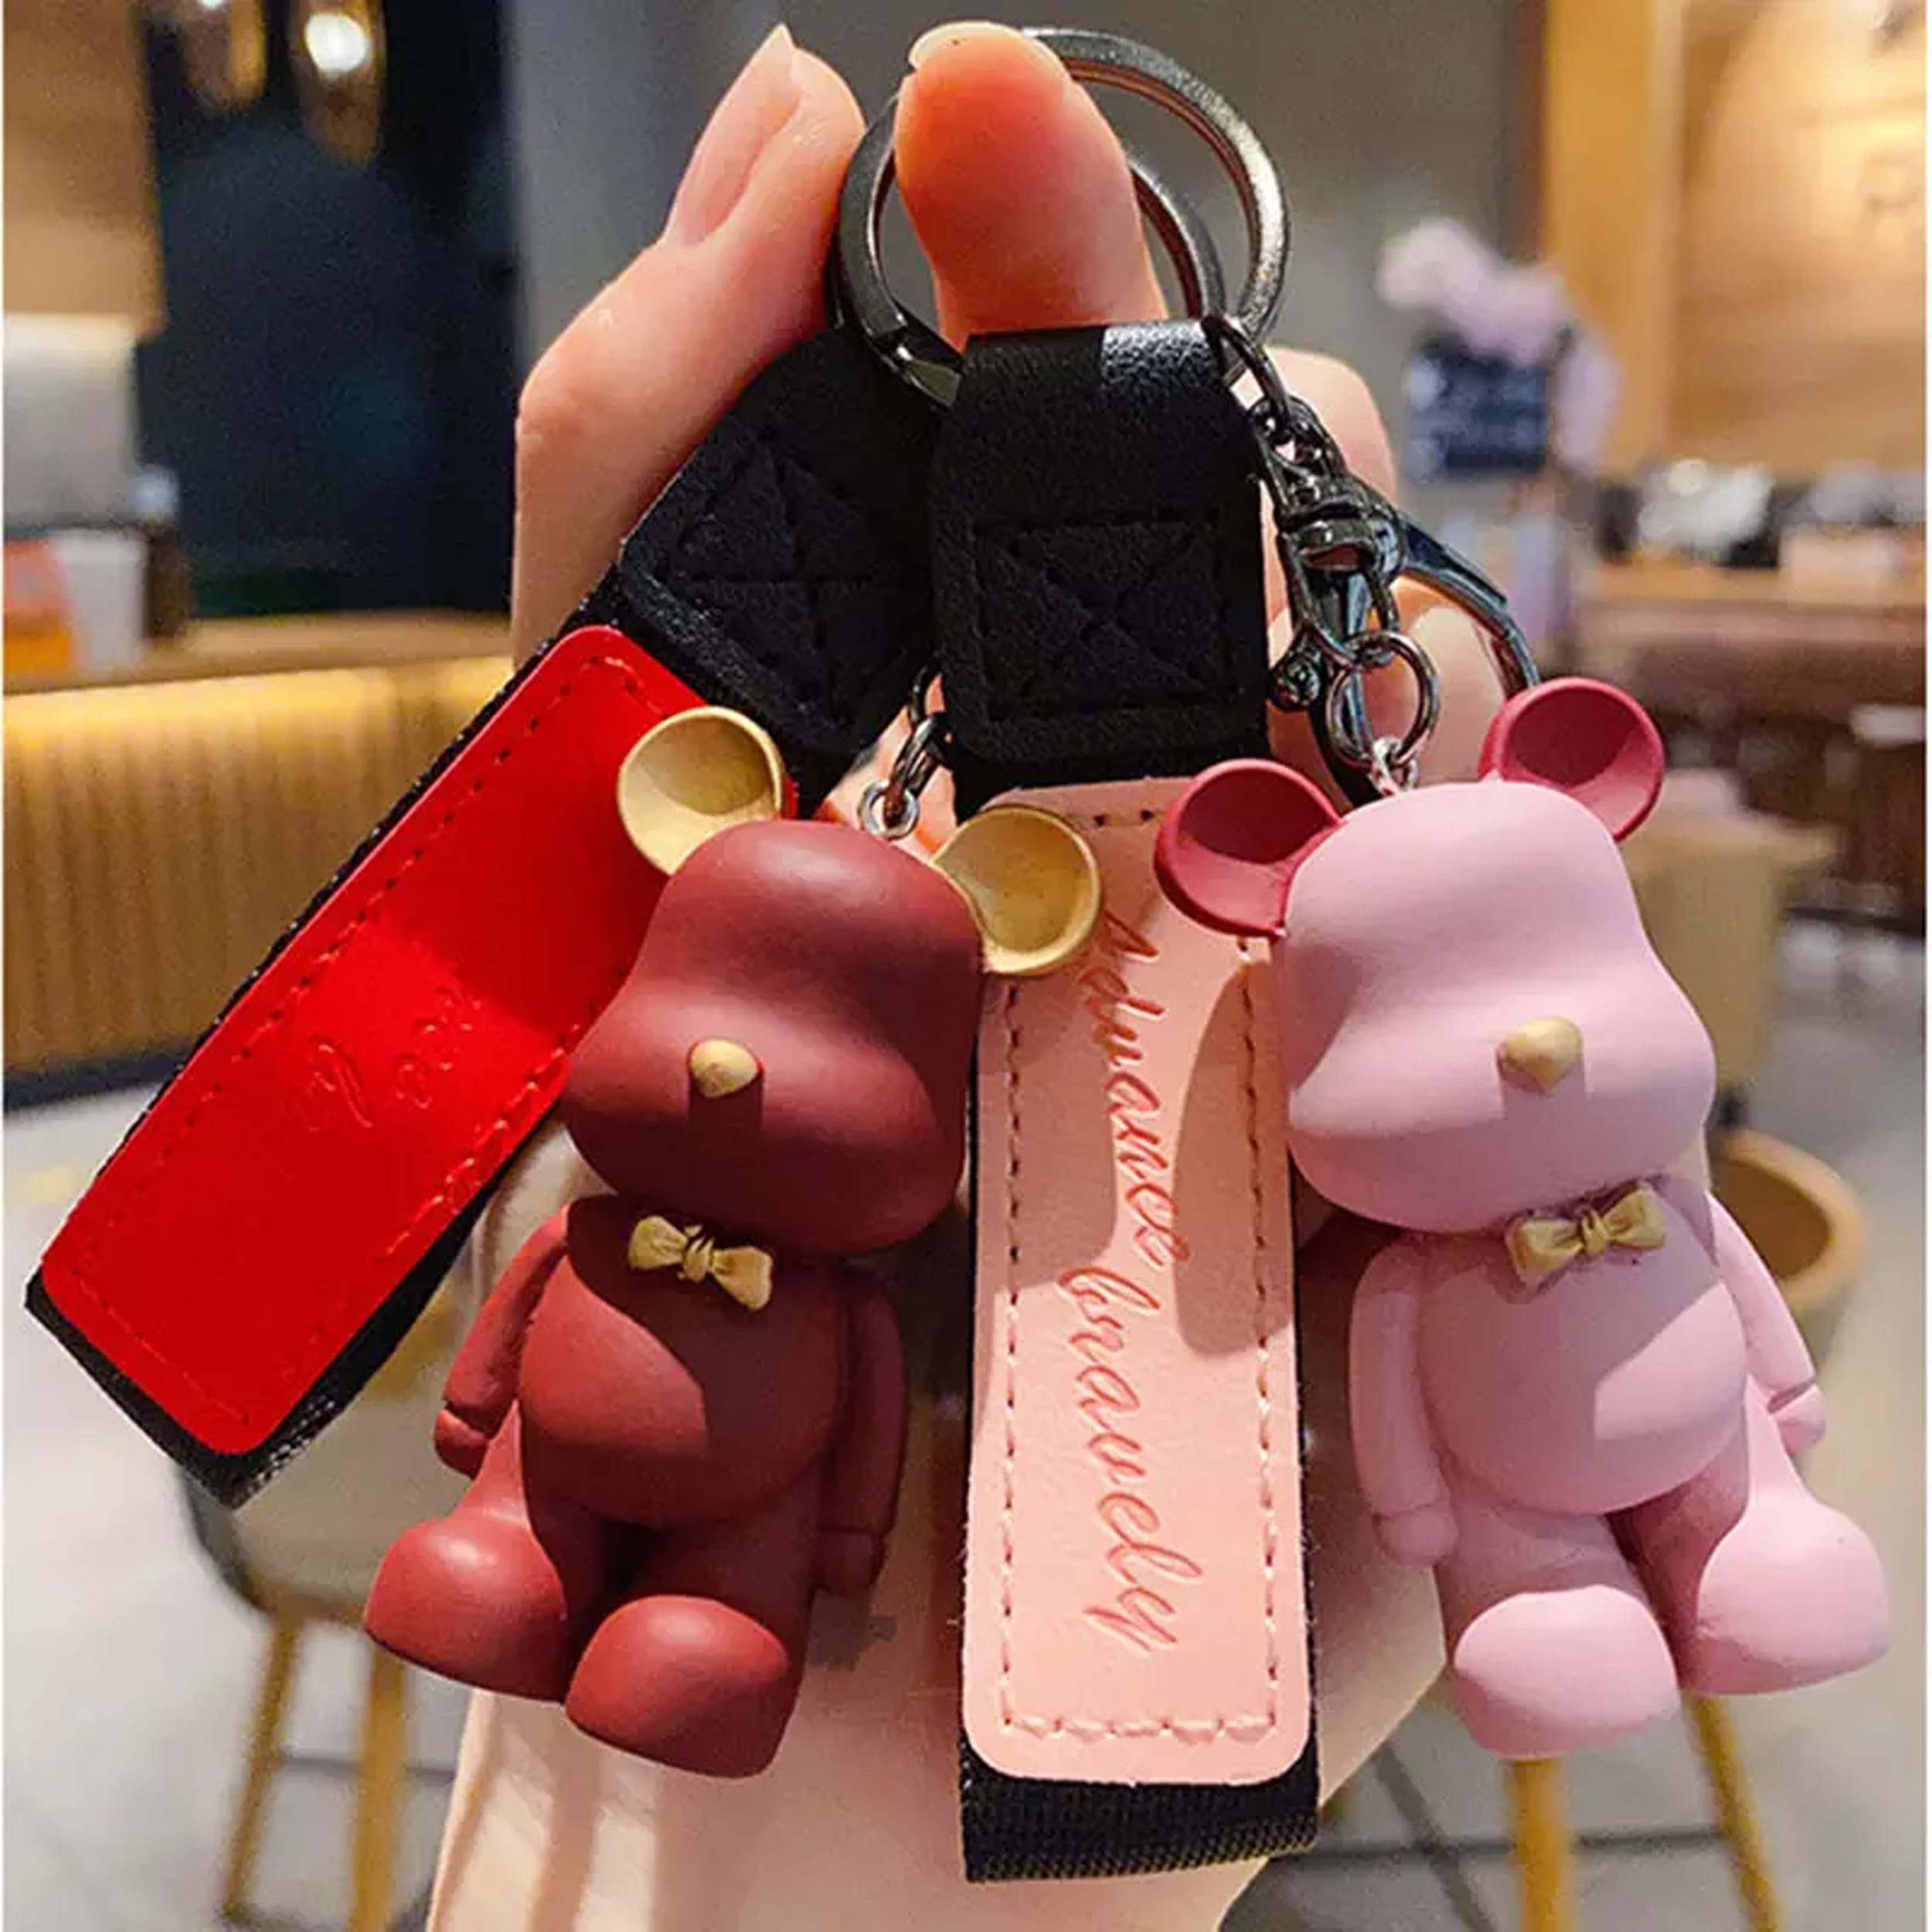 Cute Solid Cartoon Bear Keychain: The Perfect Accessory for Your Keys